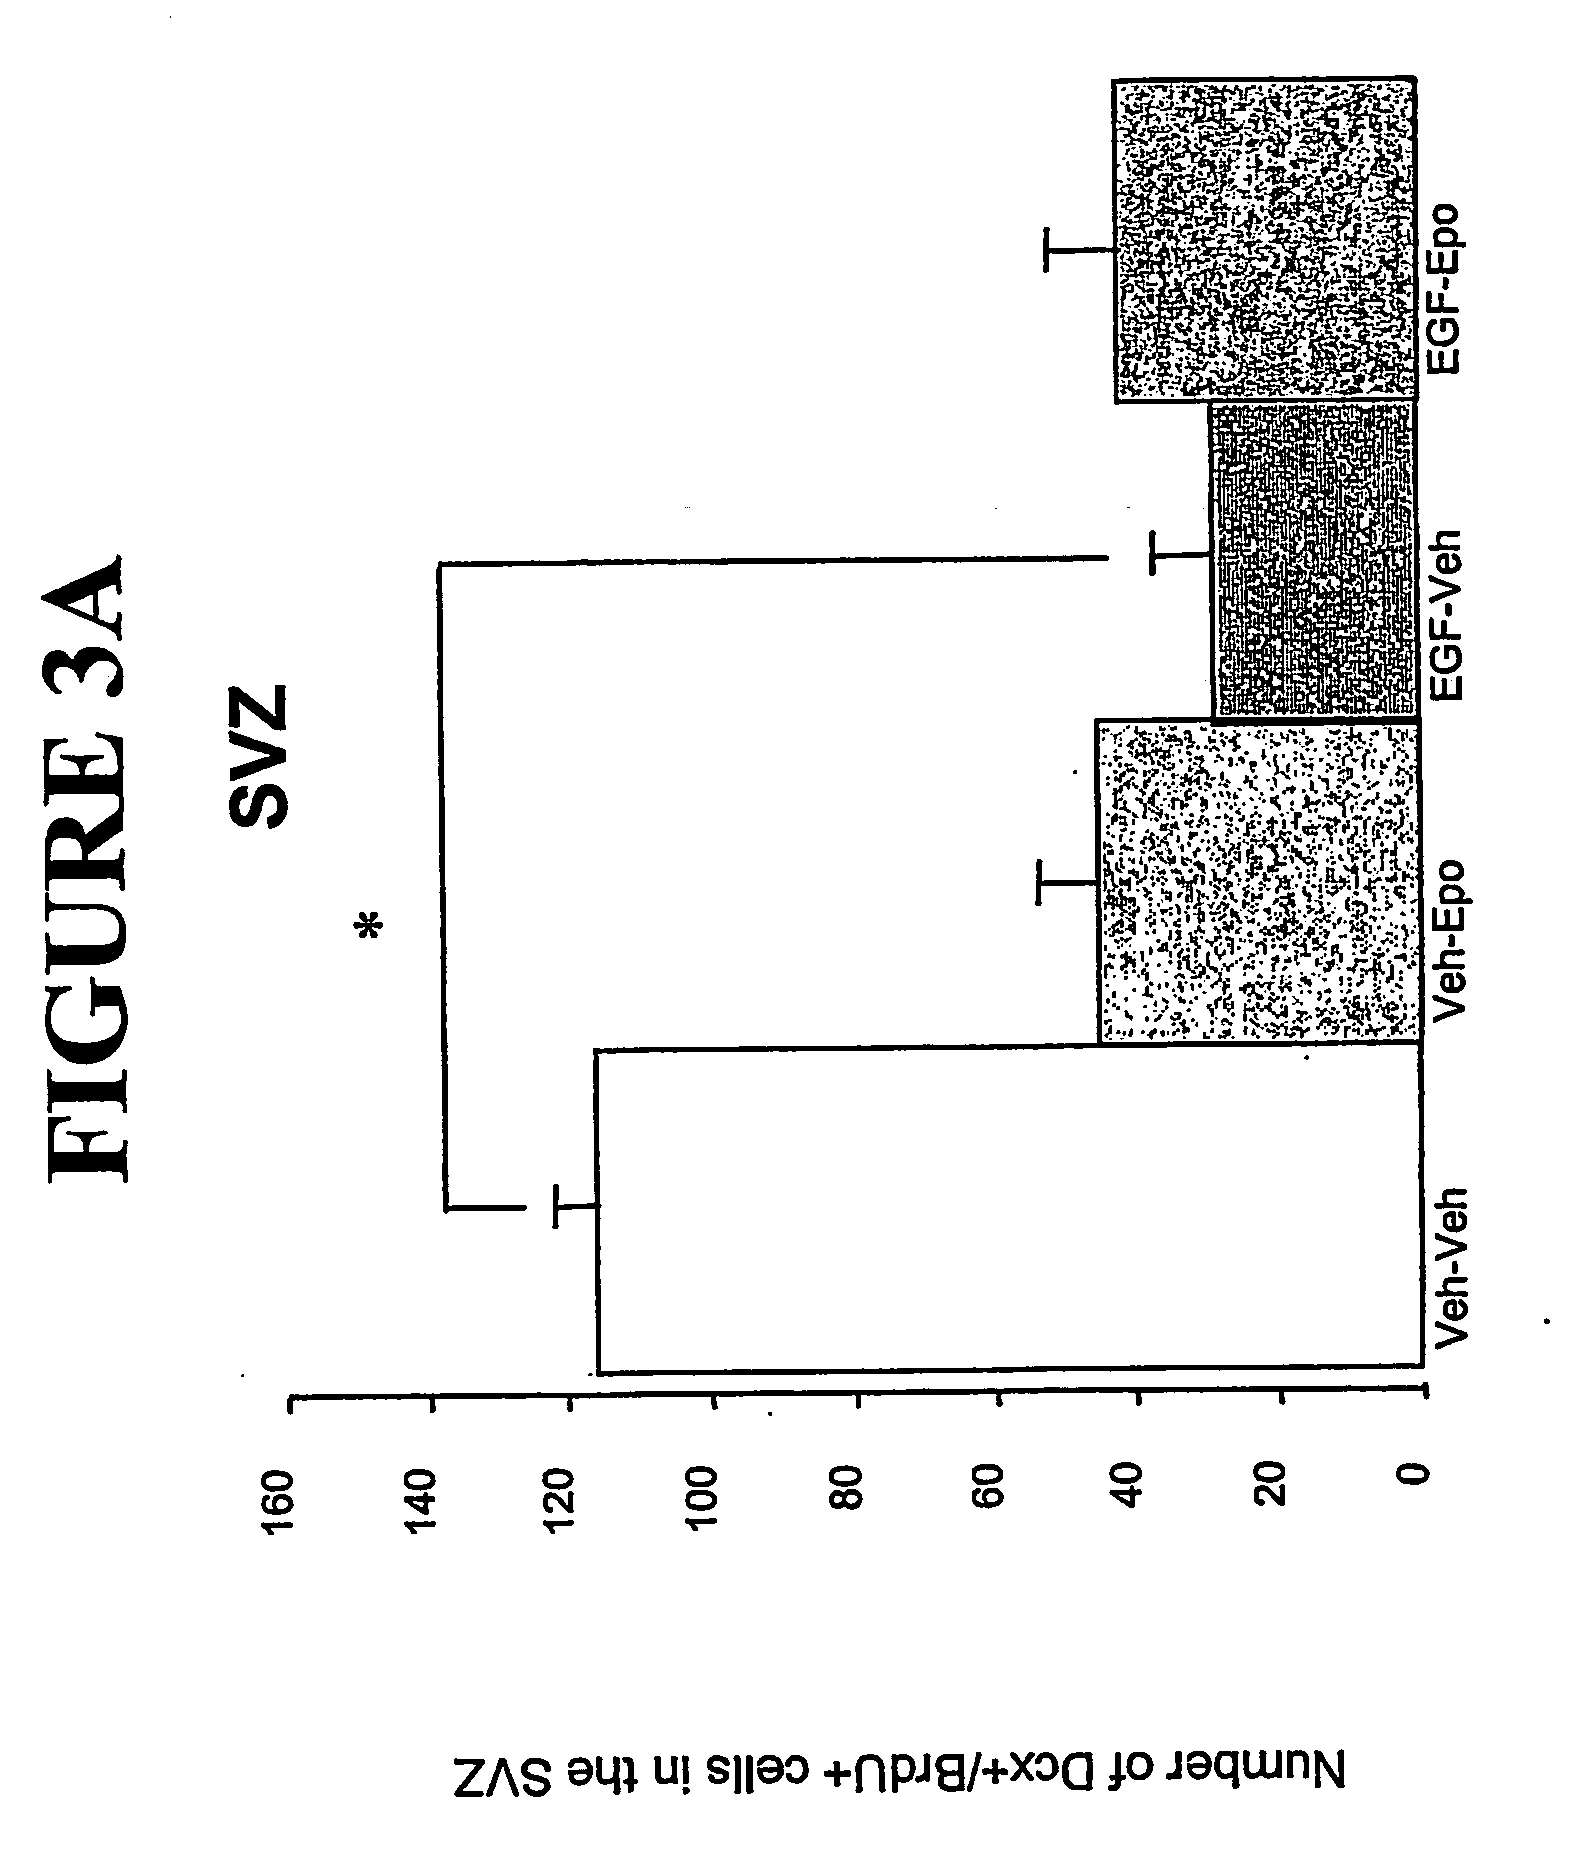 Method of enhancing and/or inducing neuronal migration using erythropoietin